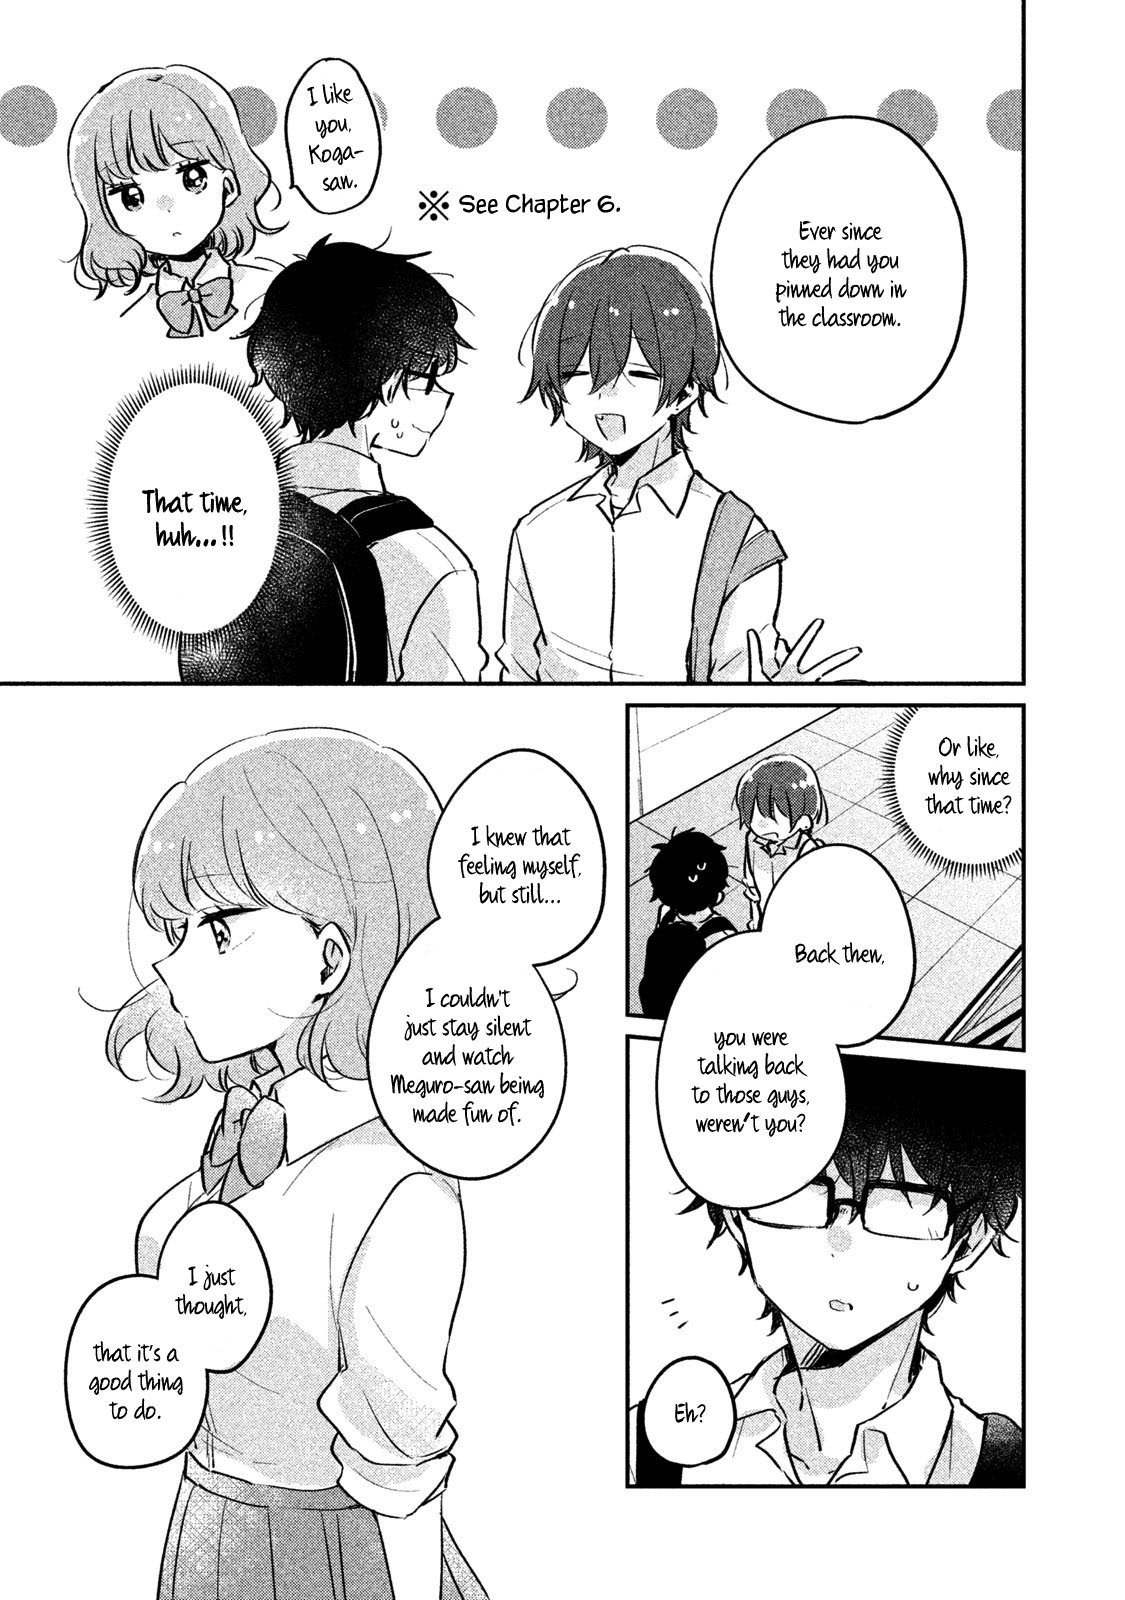 It's Not Meguro-san's First Time chapter 12 page 7